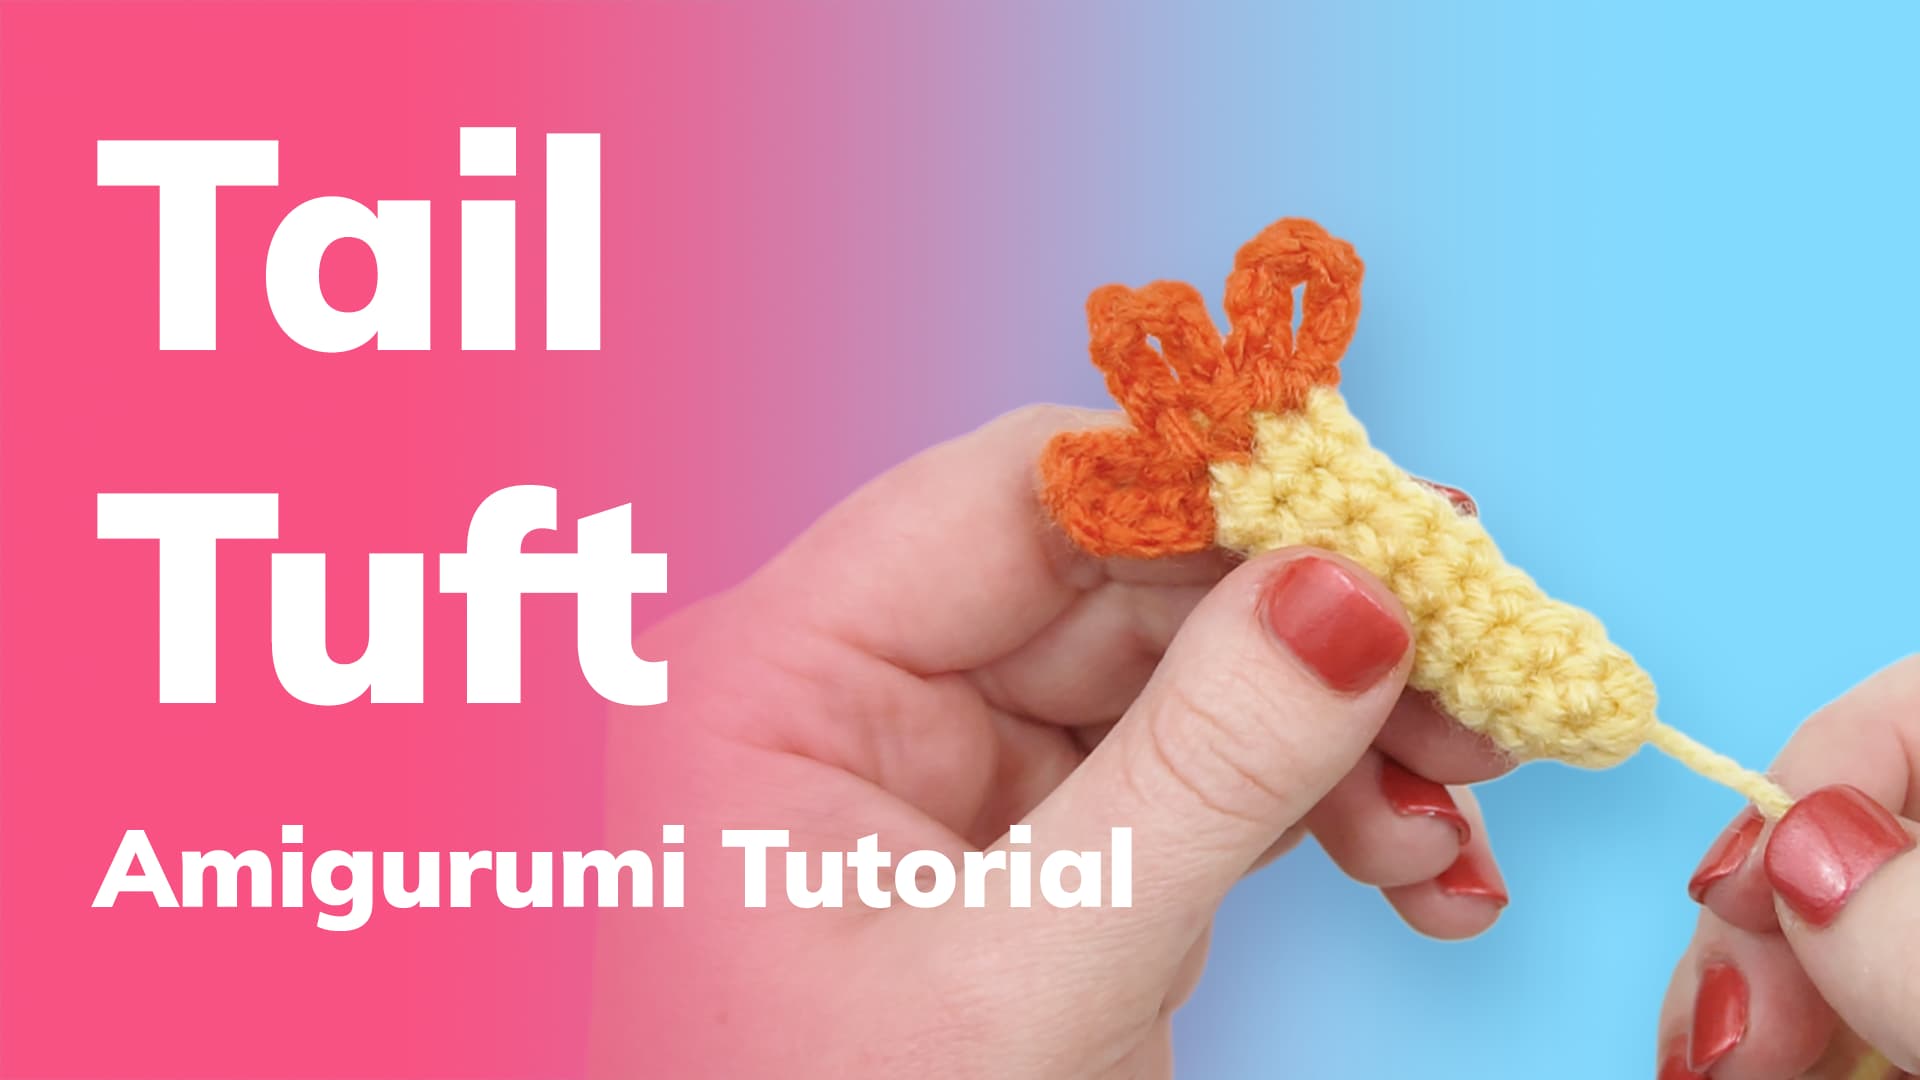 How to crochet a tail tuft for amigurumi crochet projects